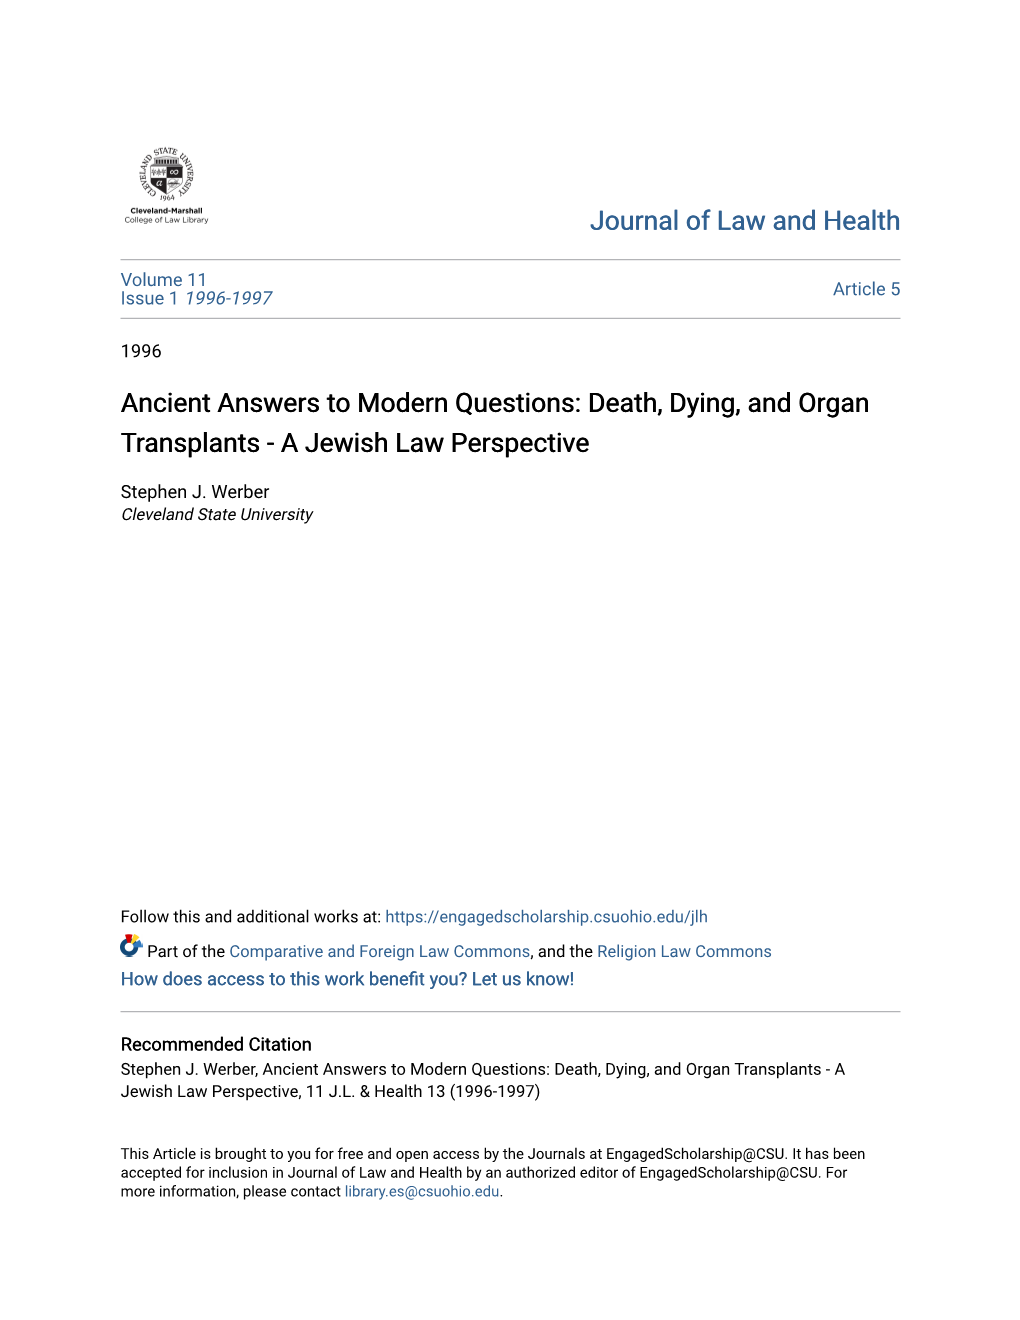 Death, Dying, and Organ Transplants - a Jewish Law Perspective